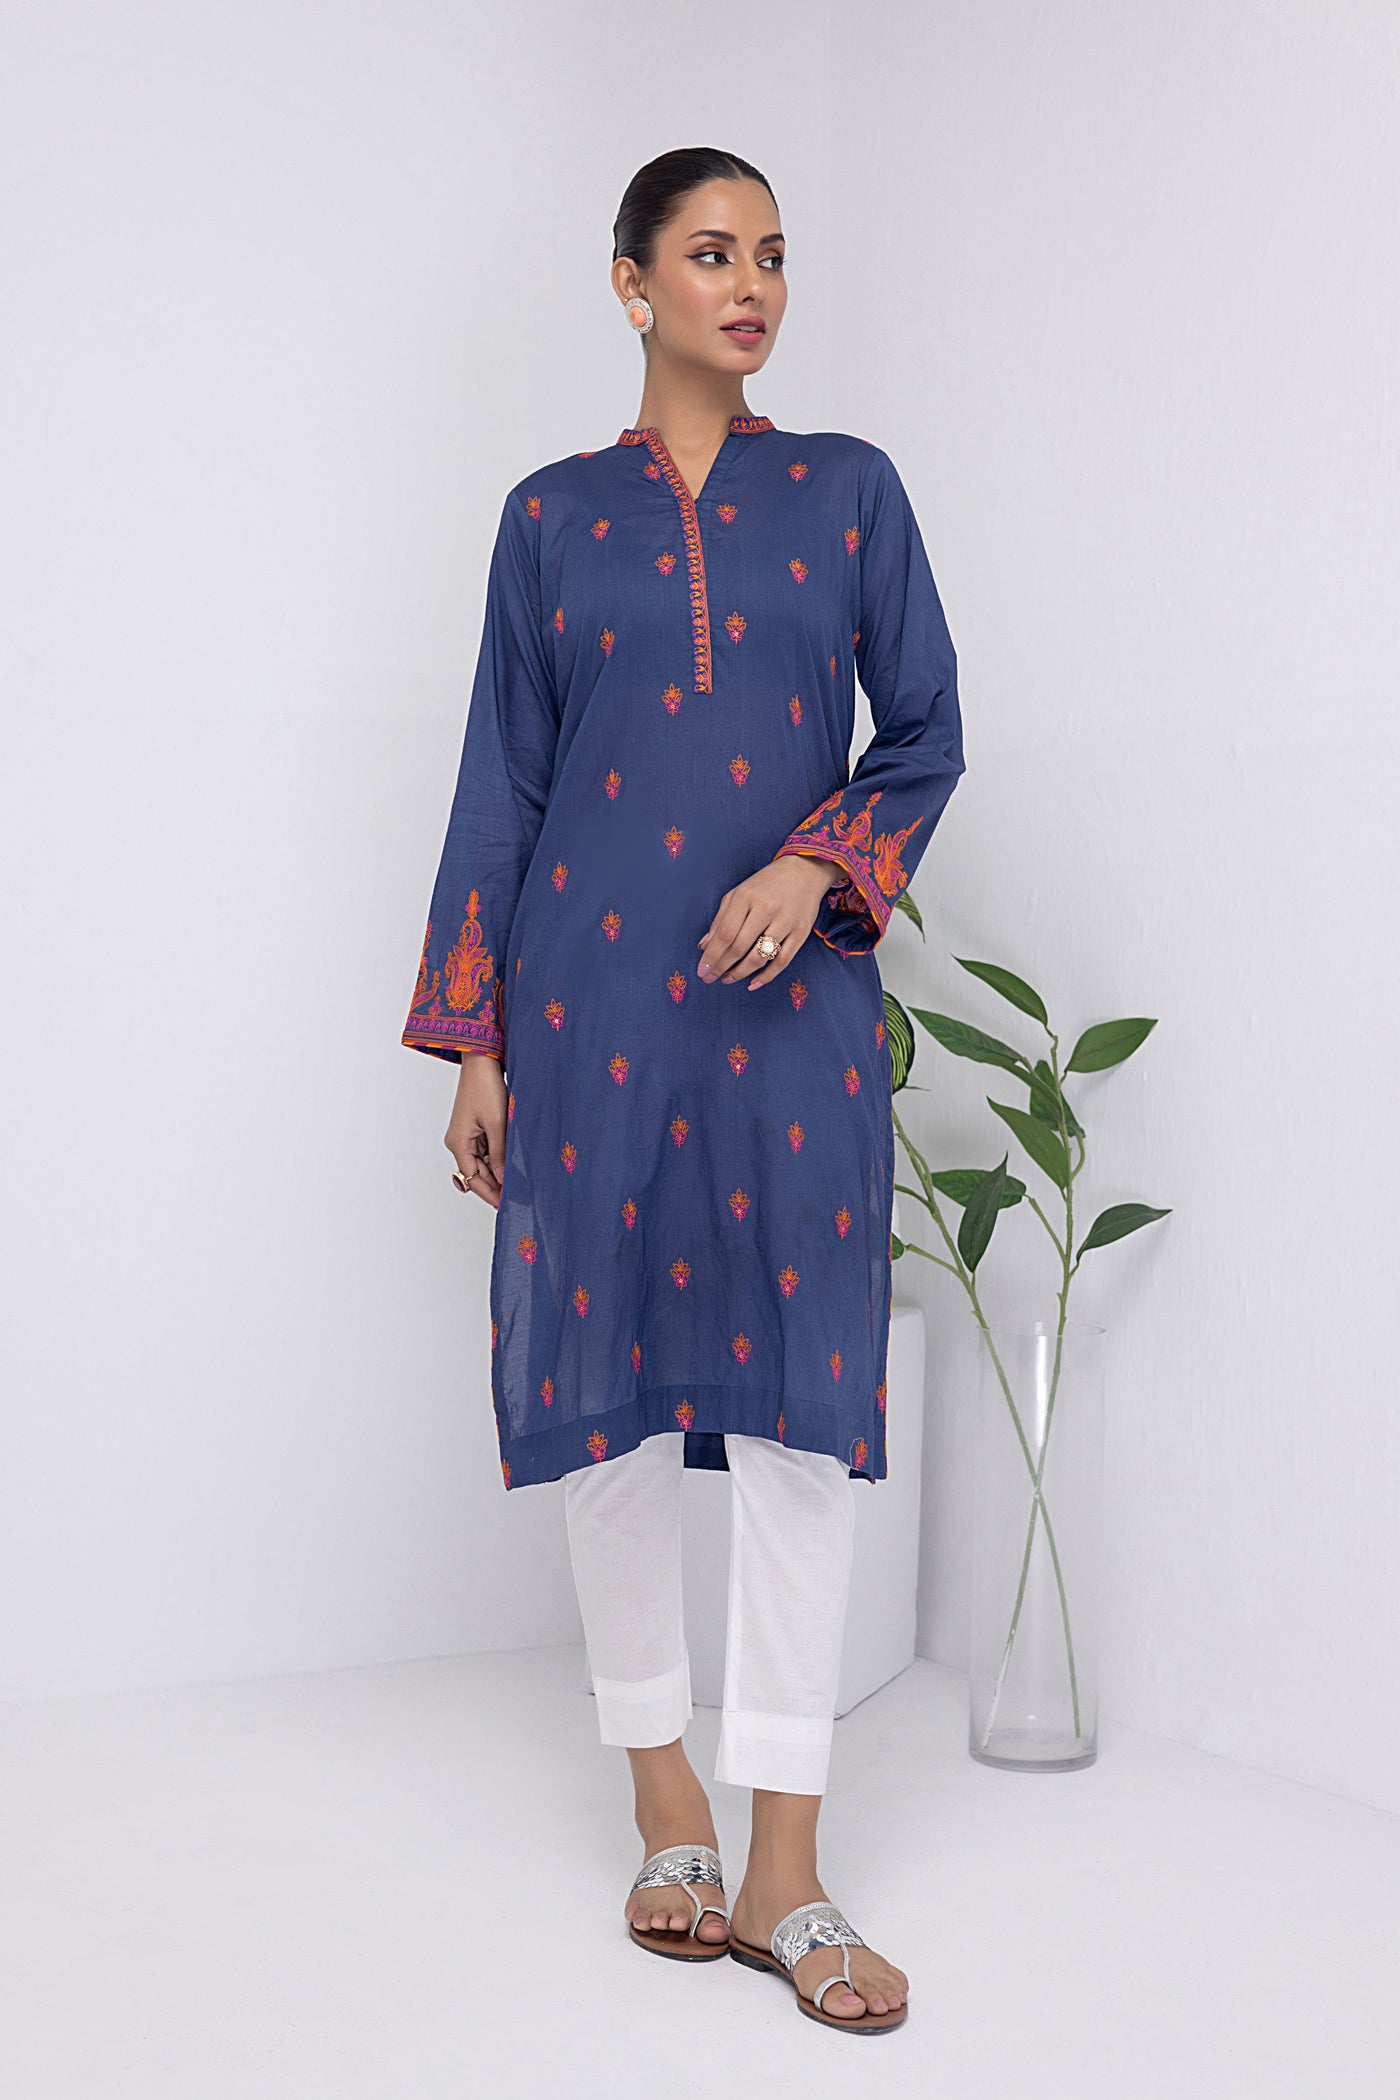 Lakhany 01 Piece Ready to Wear Dyed Embroidered Shirt - LG-ZH-0064